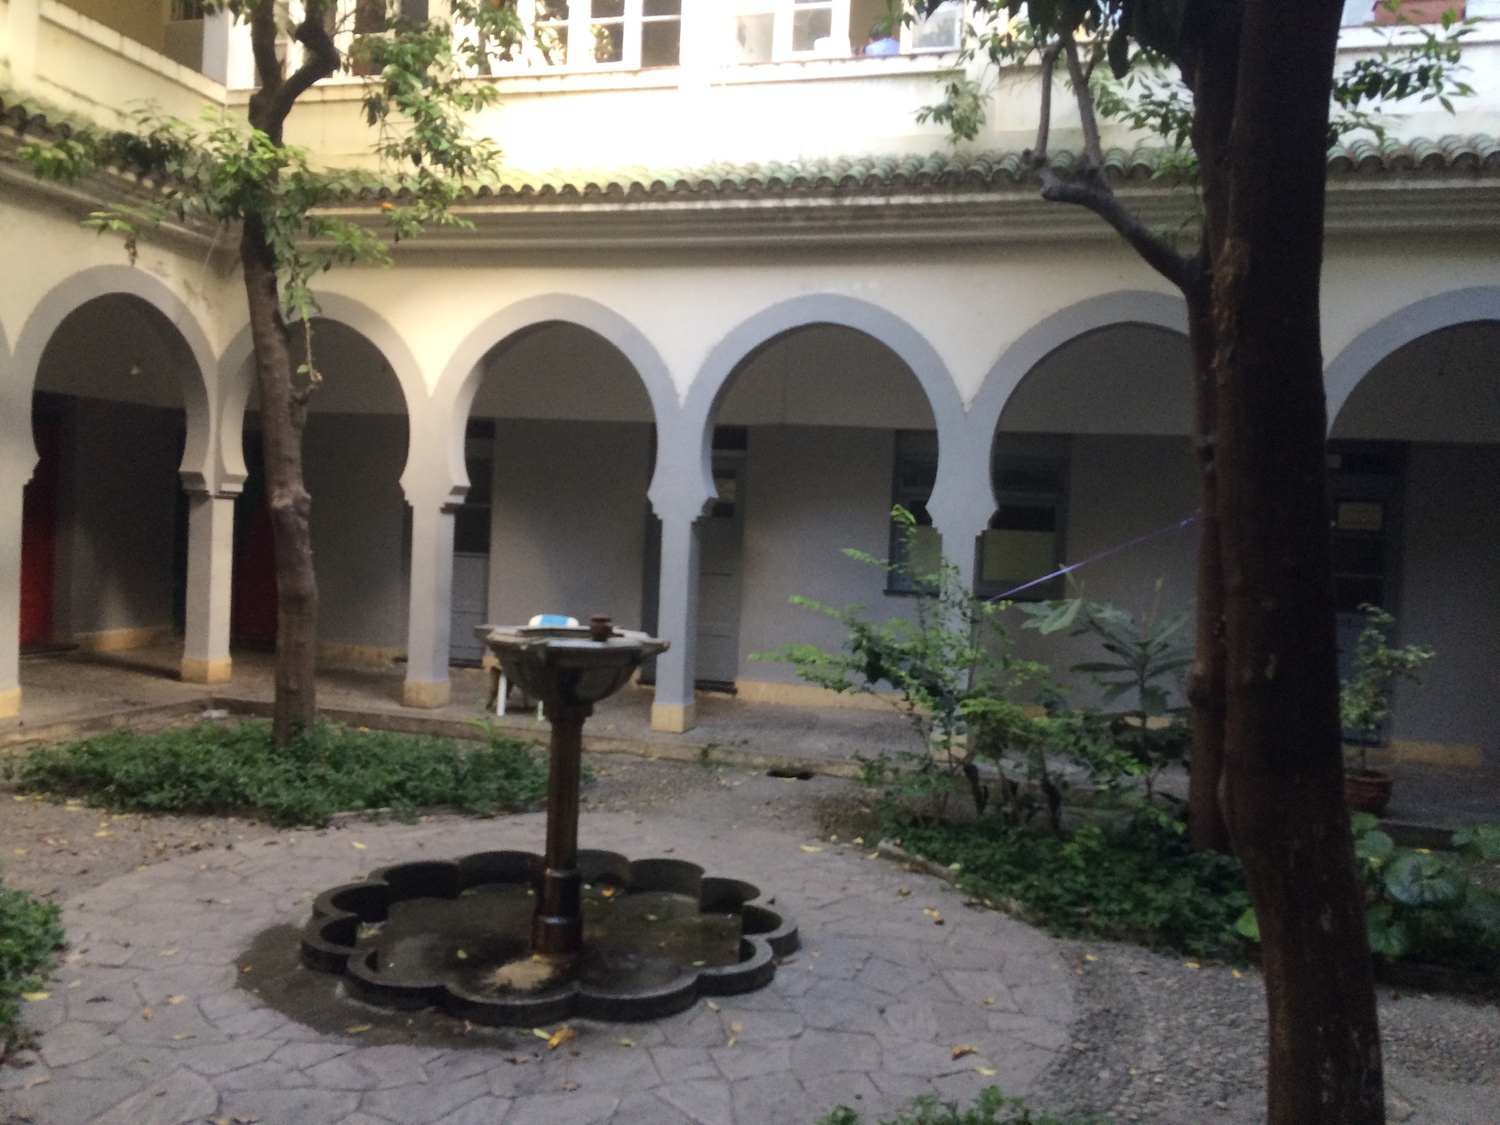 View of the courtyard fountain and vegetation